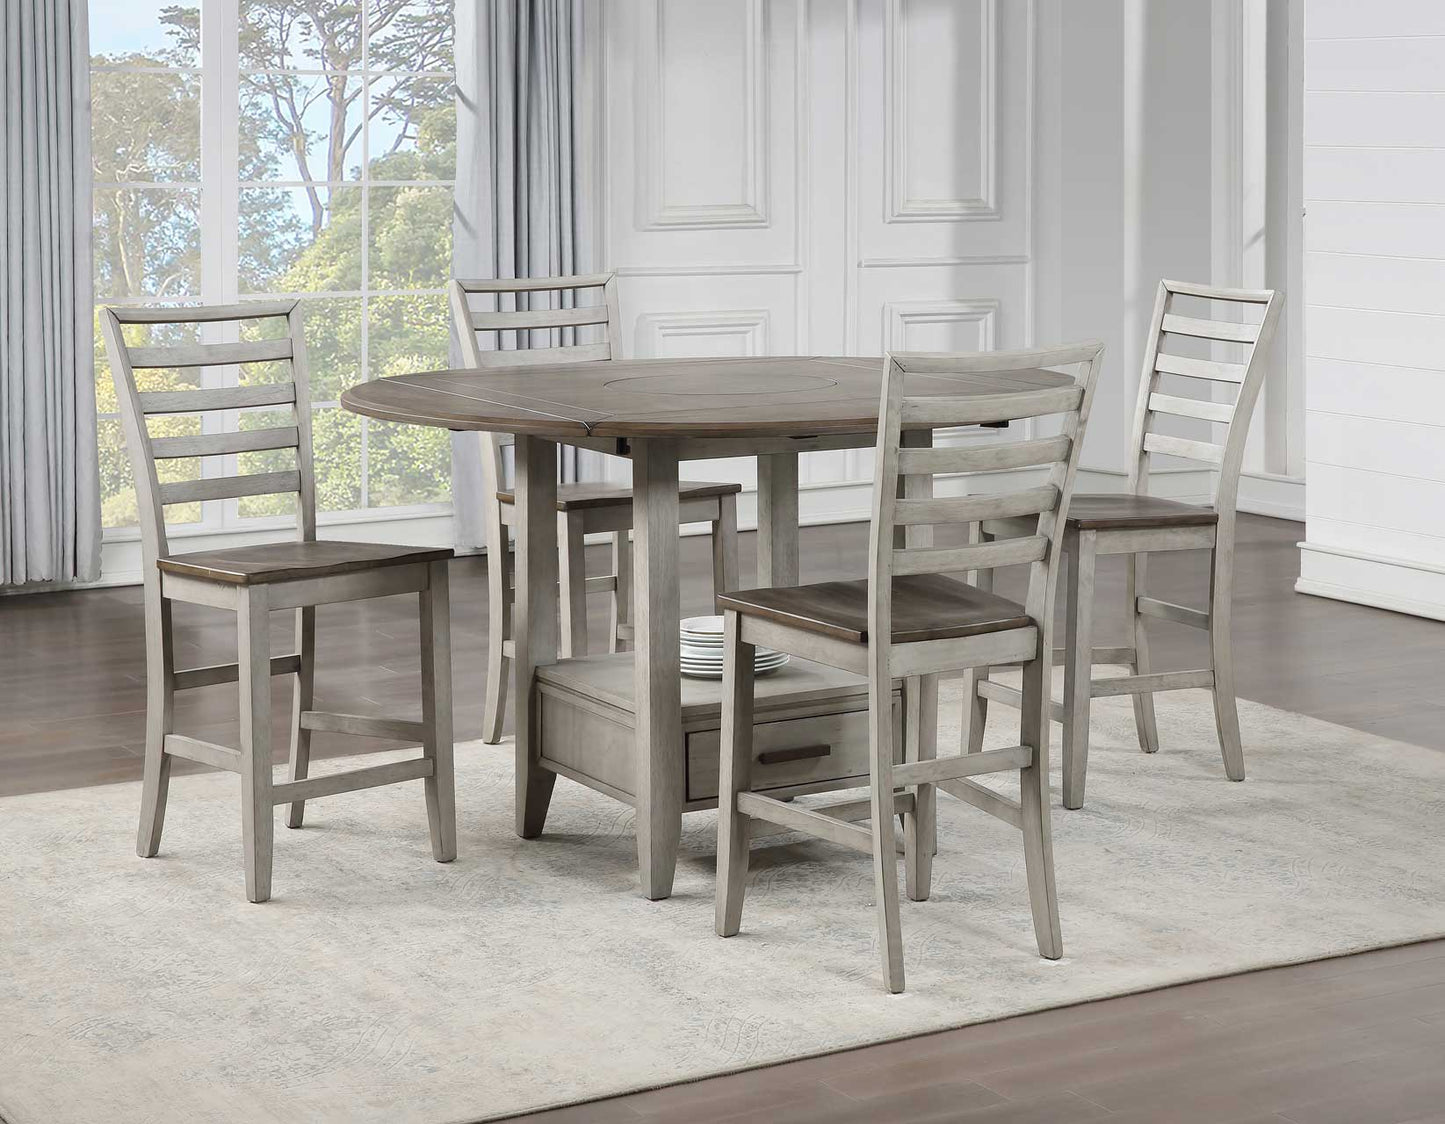 Abacus 5-Piece Counter Drop-Leaf Dining Set
(Table & 4 Chairs)